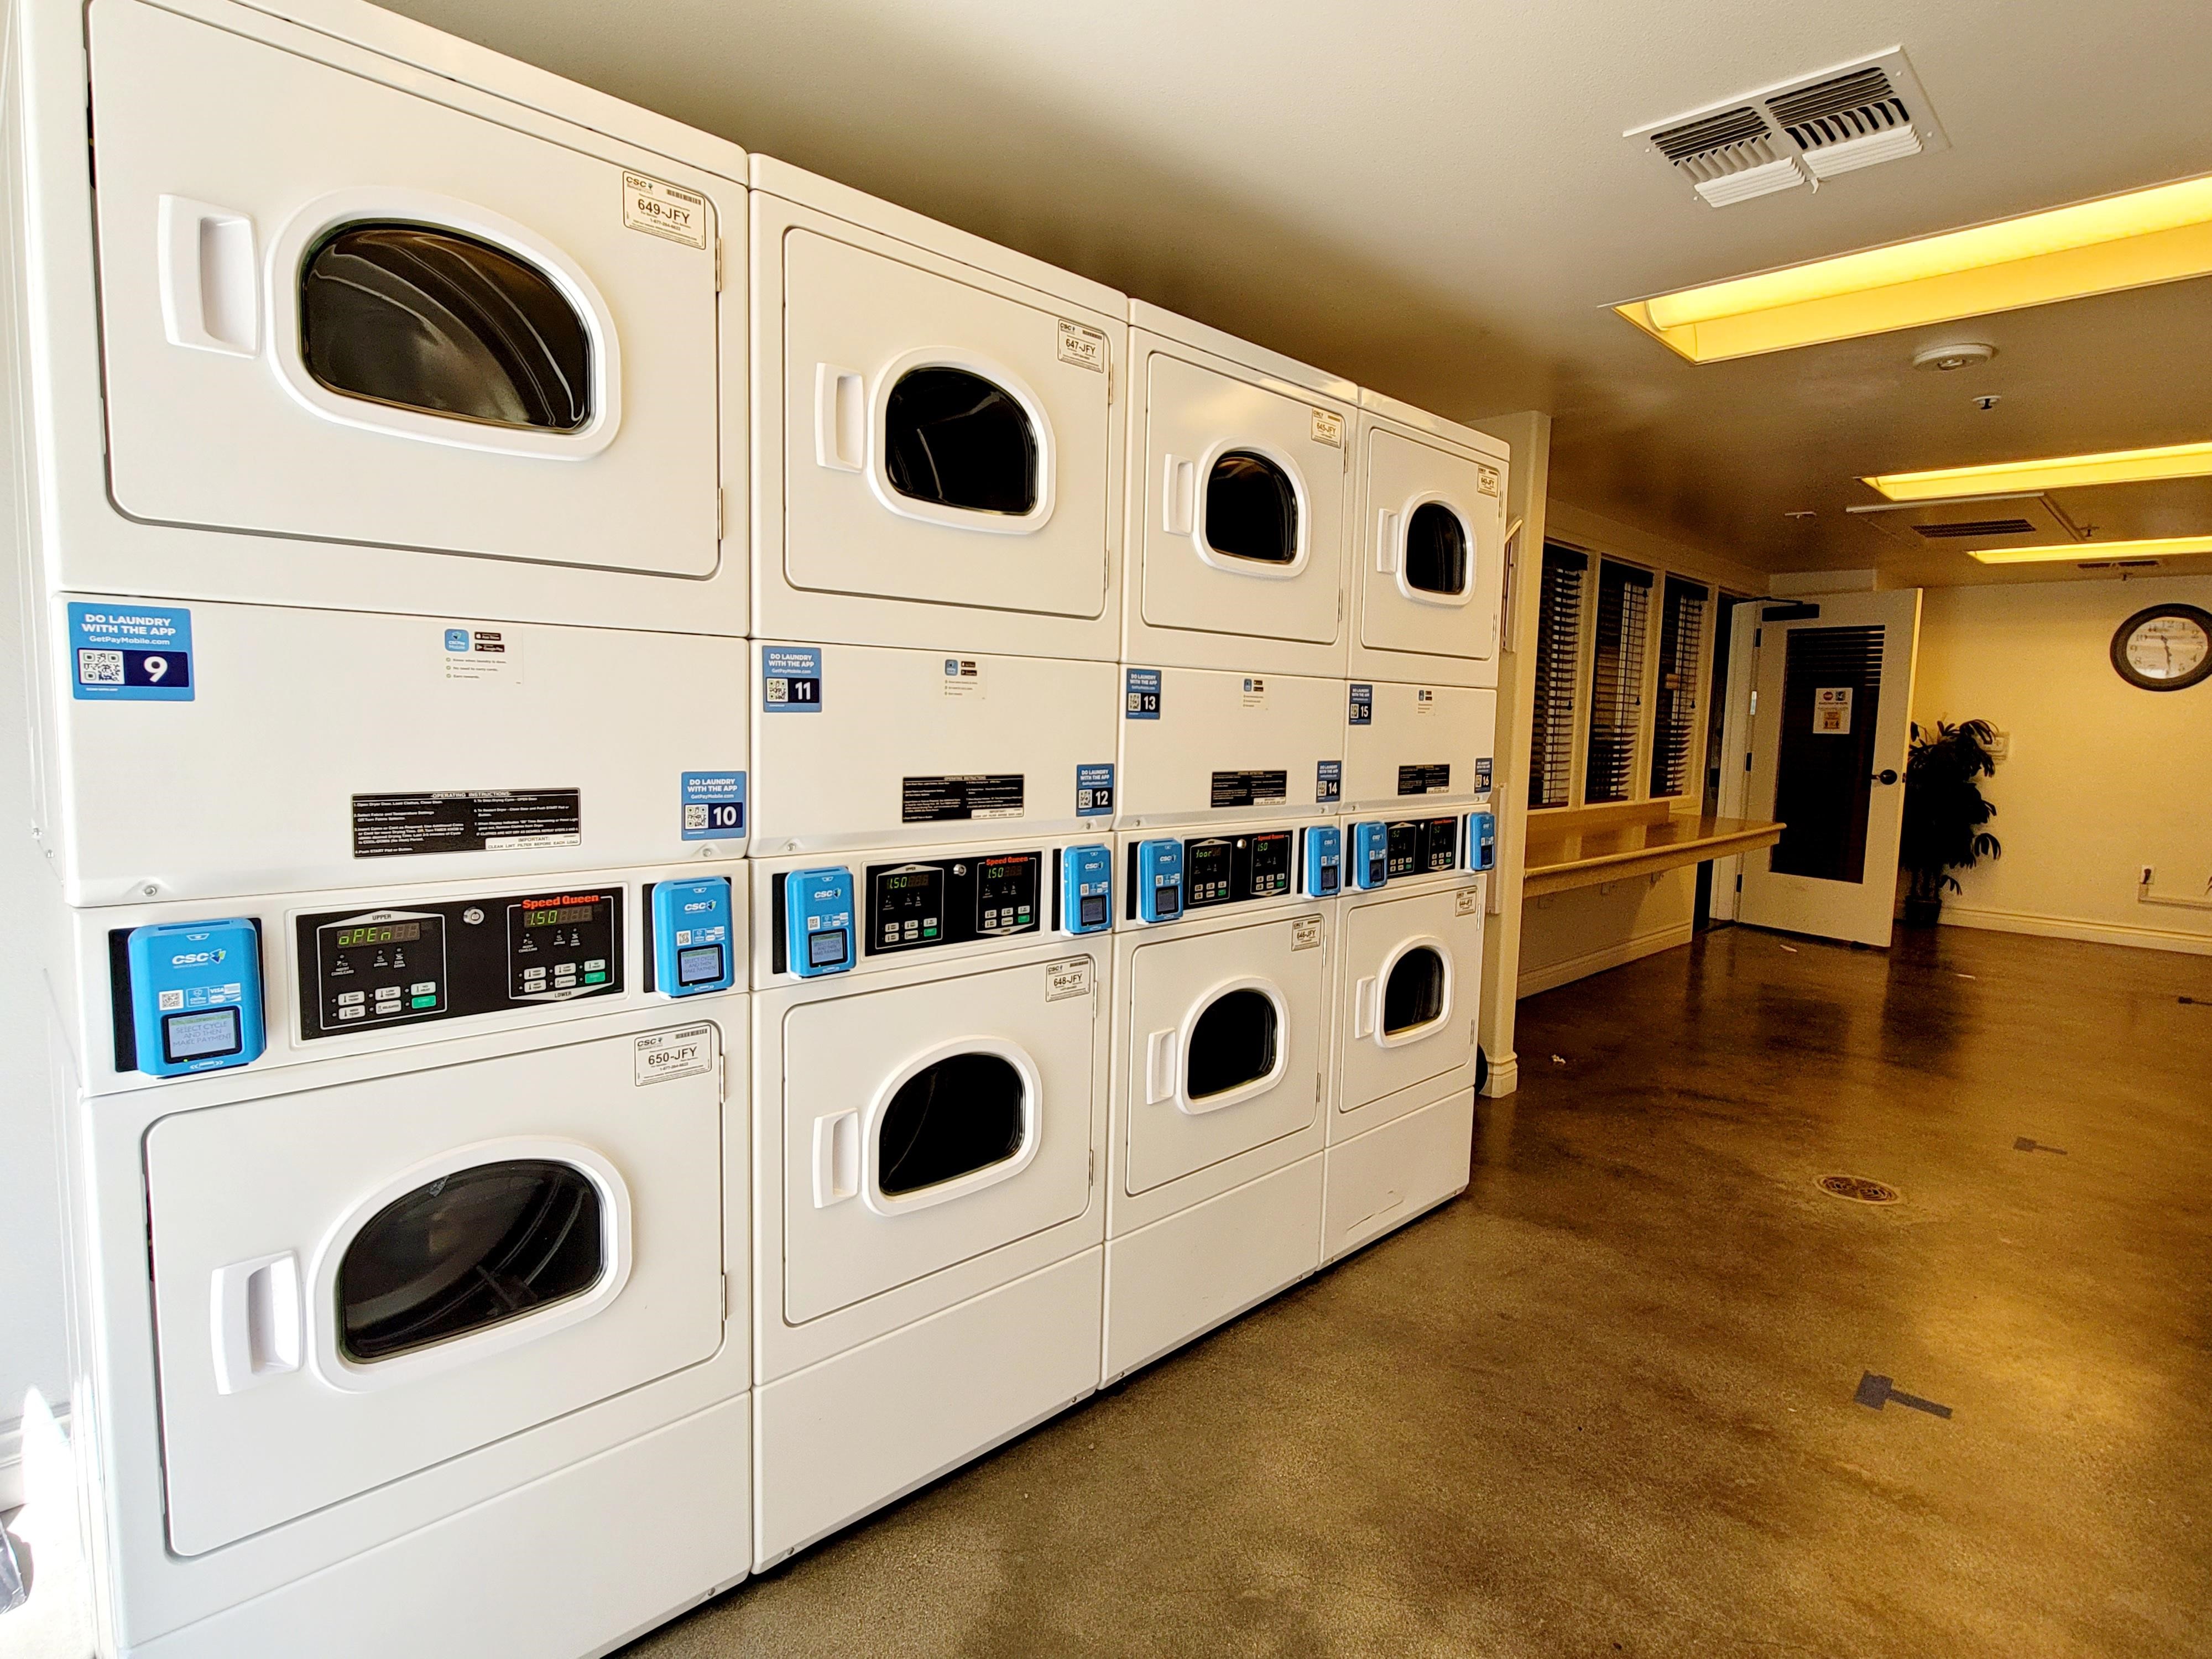 Del Rey Square Senior Housing laundry area. Stacked dryer machines along wall. Long folding table located next to dryers.